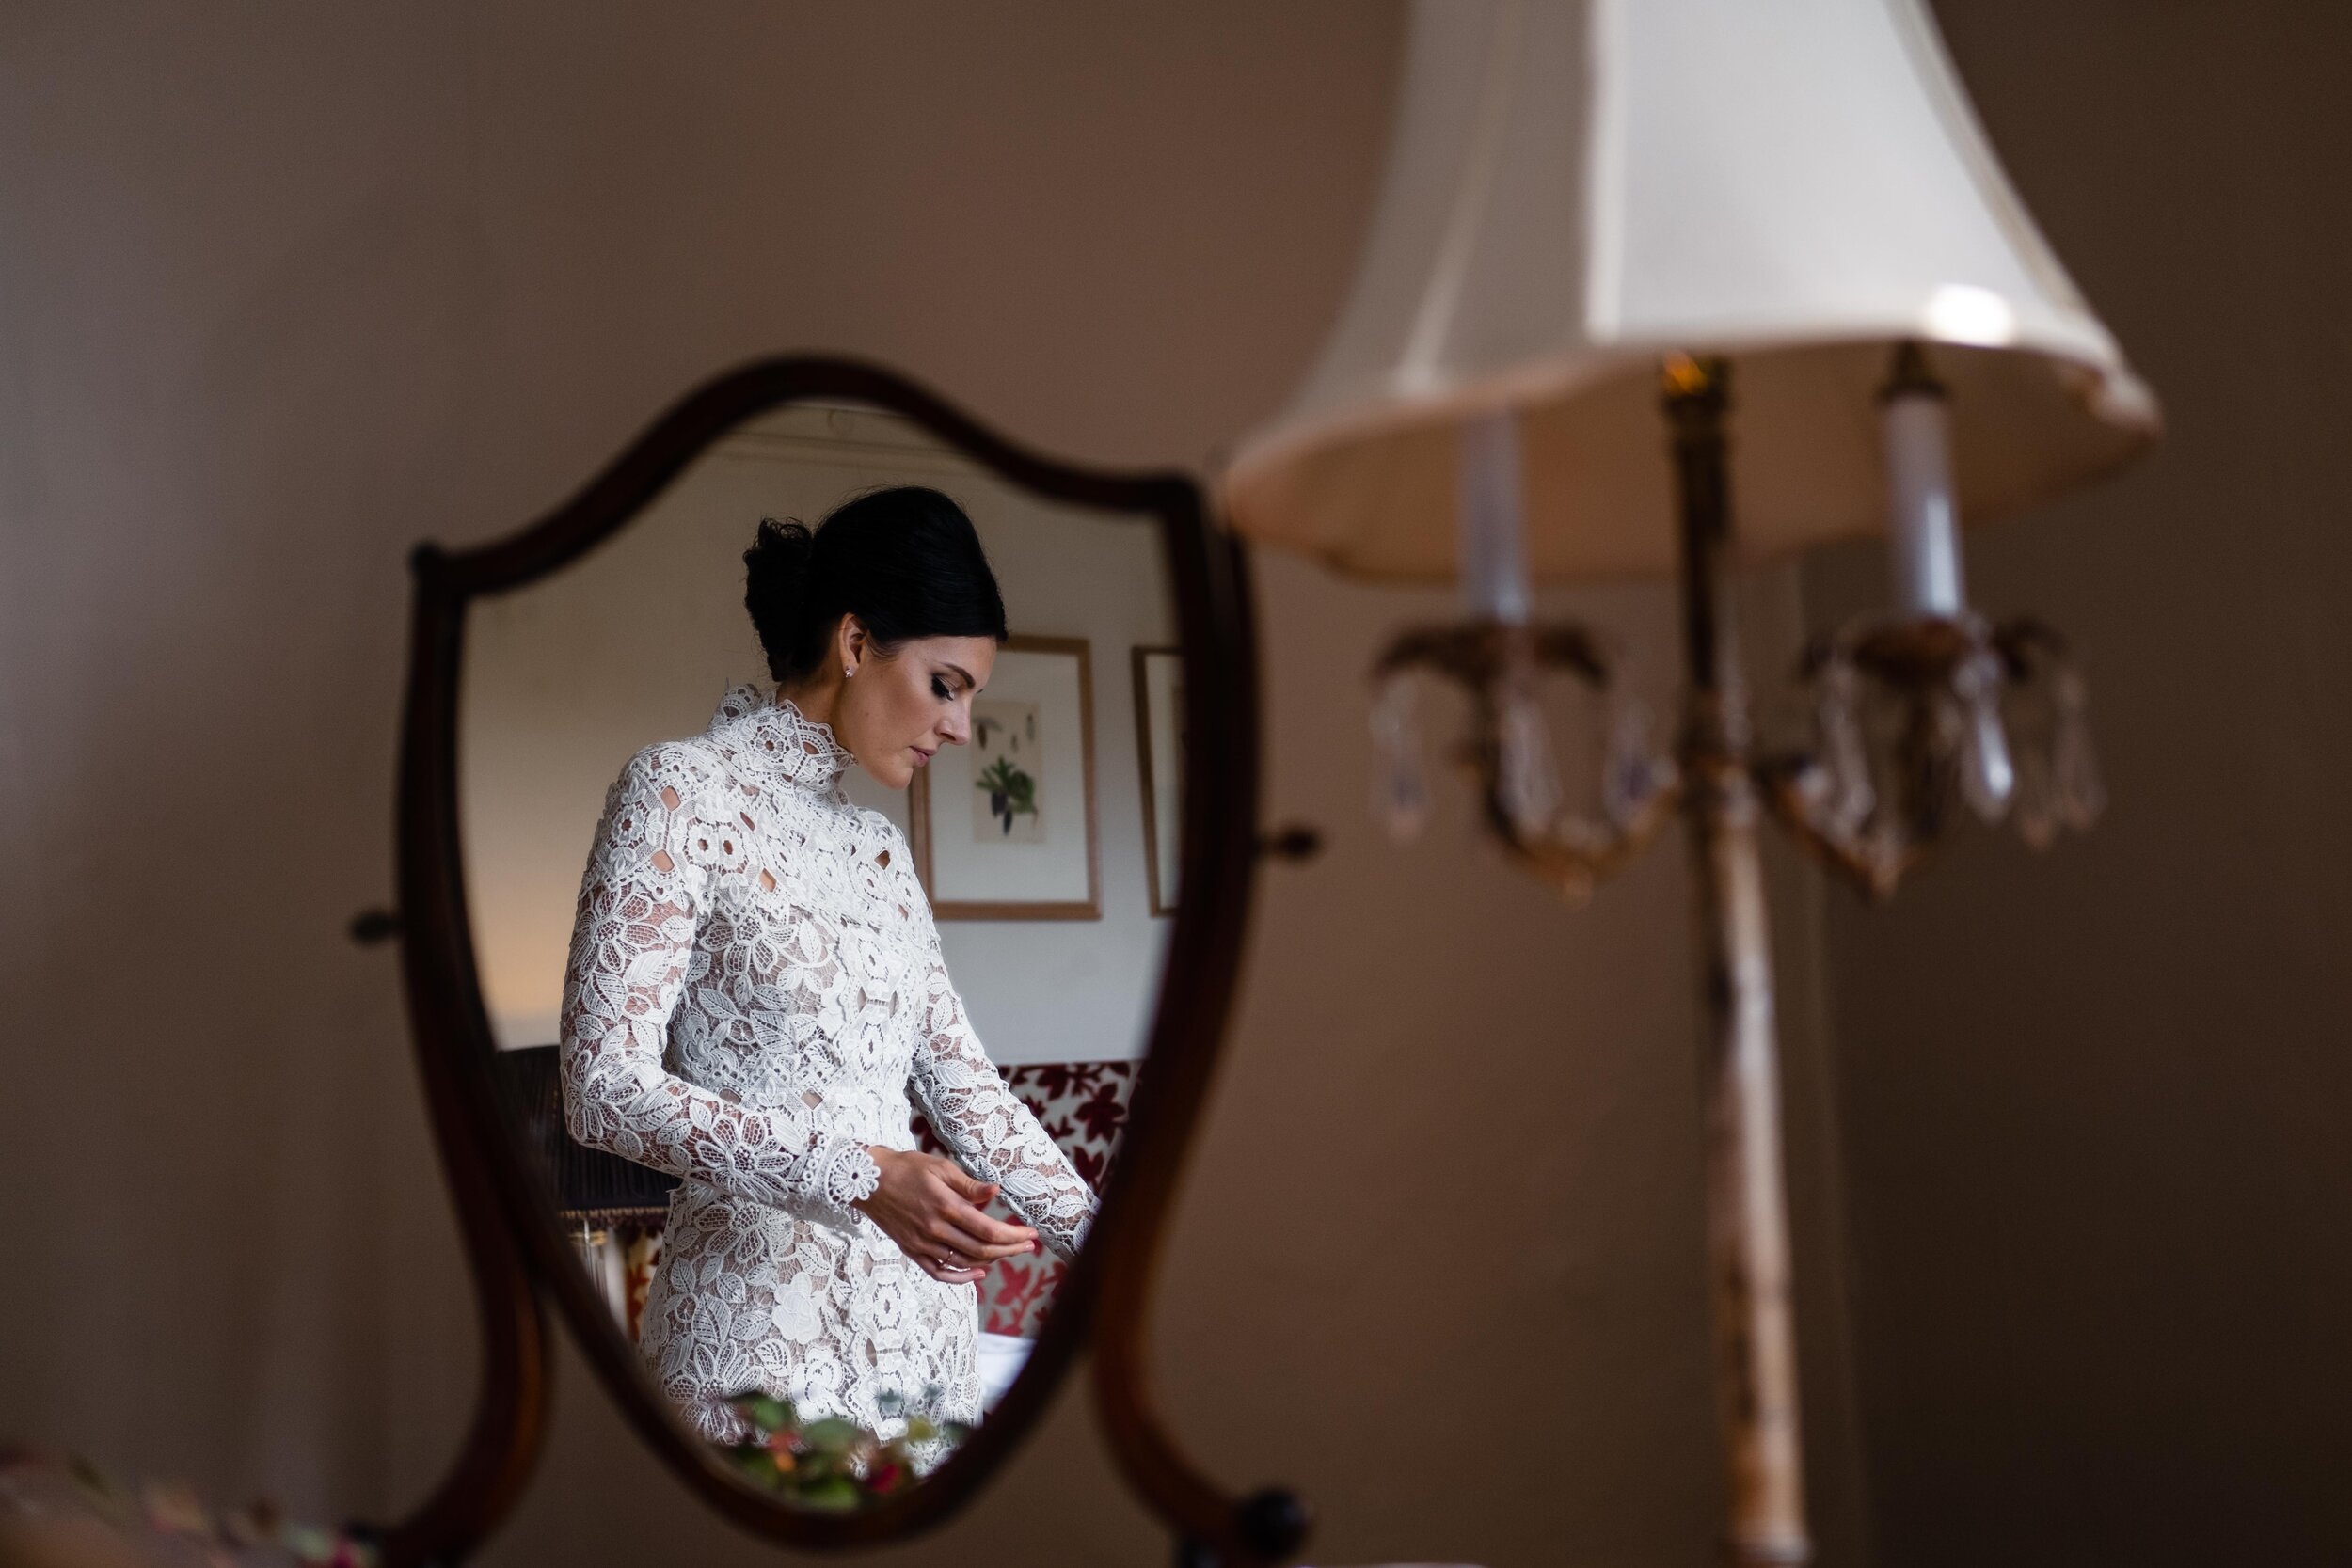 photo of bride in mirror with lampshade in foreground